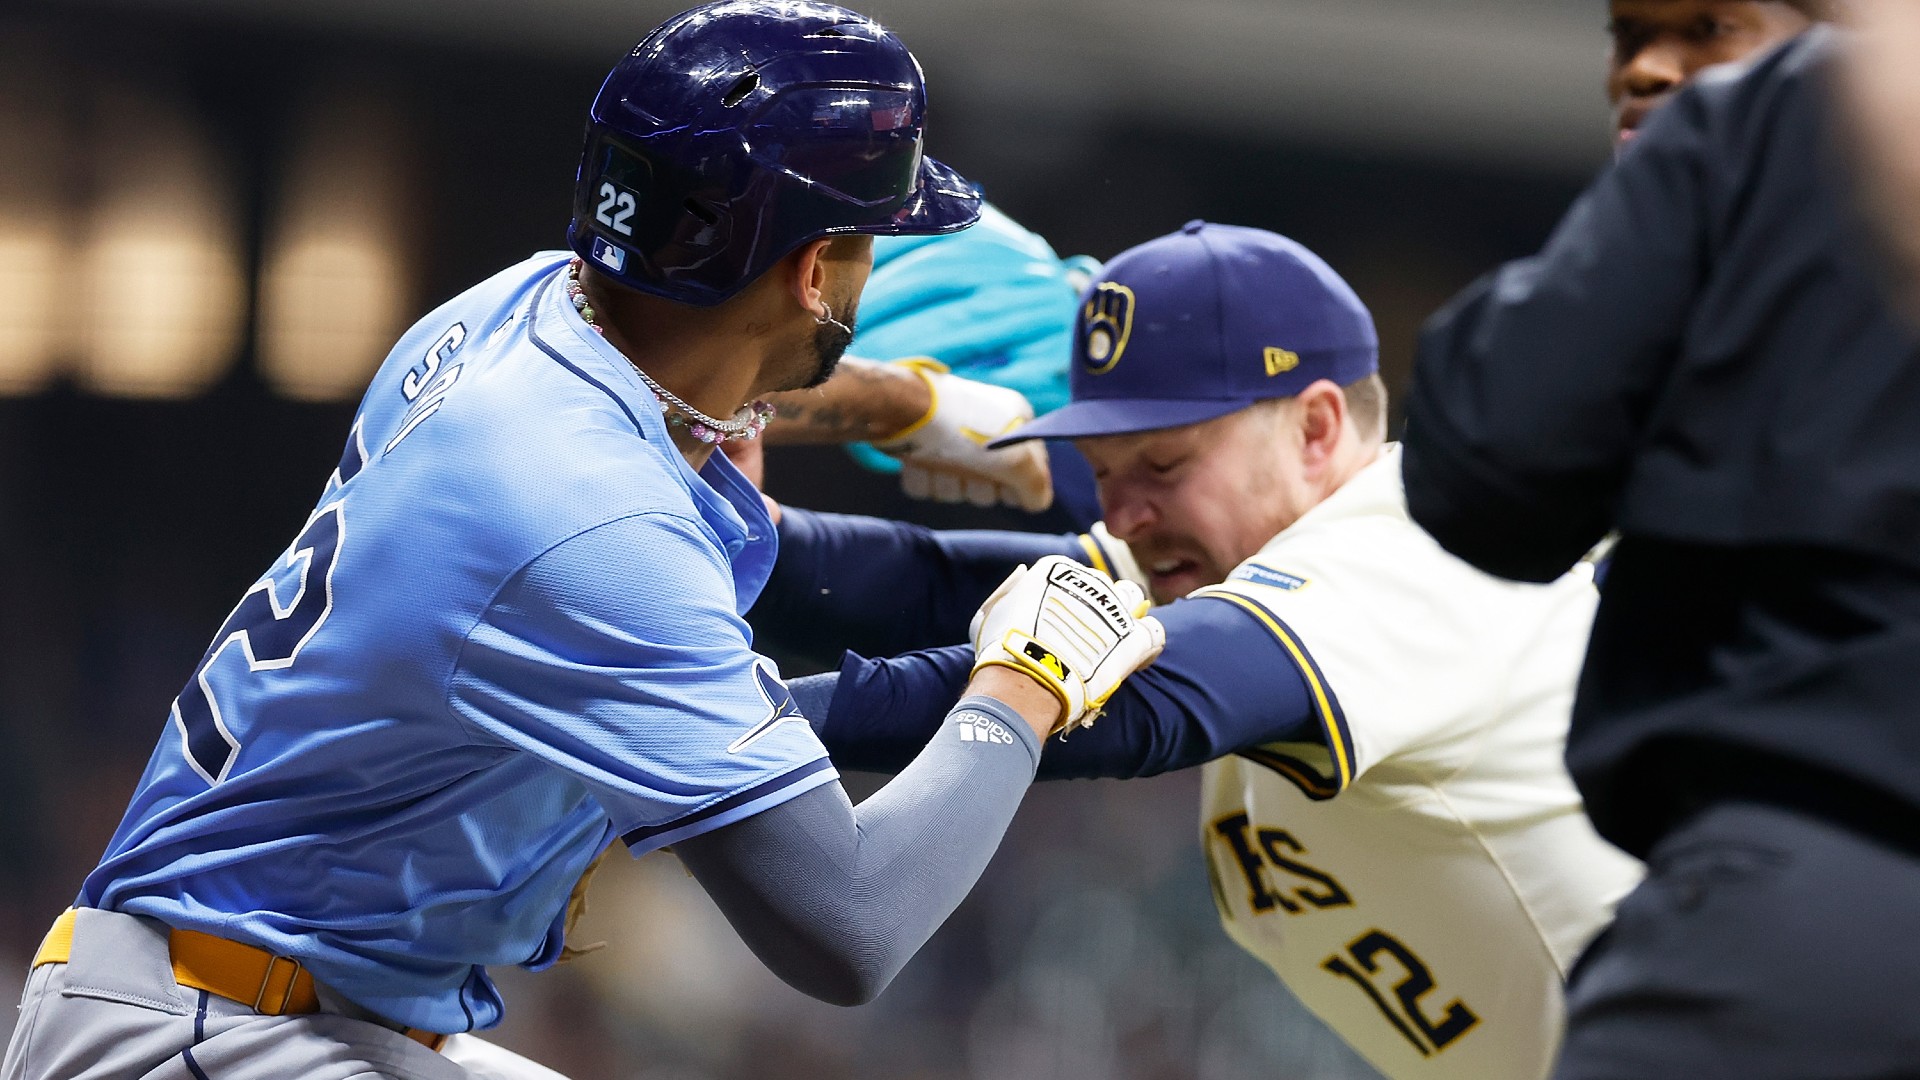 Brewers vs. Rays Game Erupts in Brawl